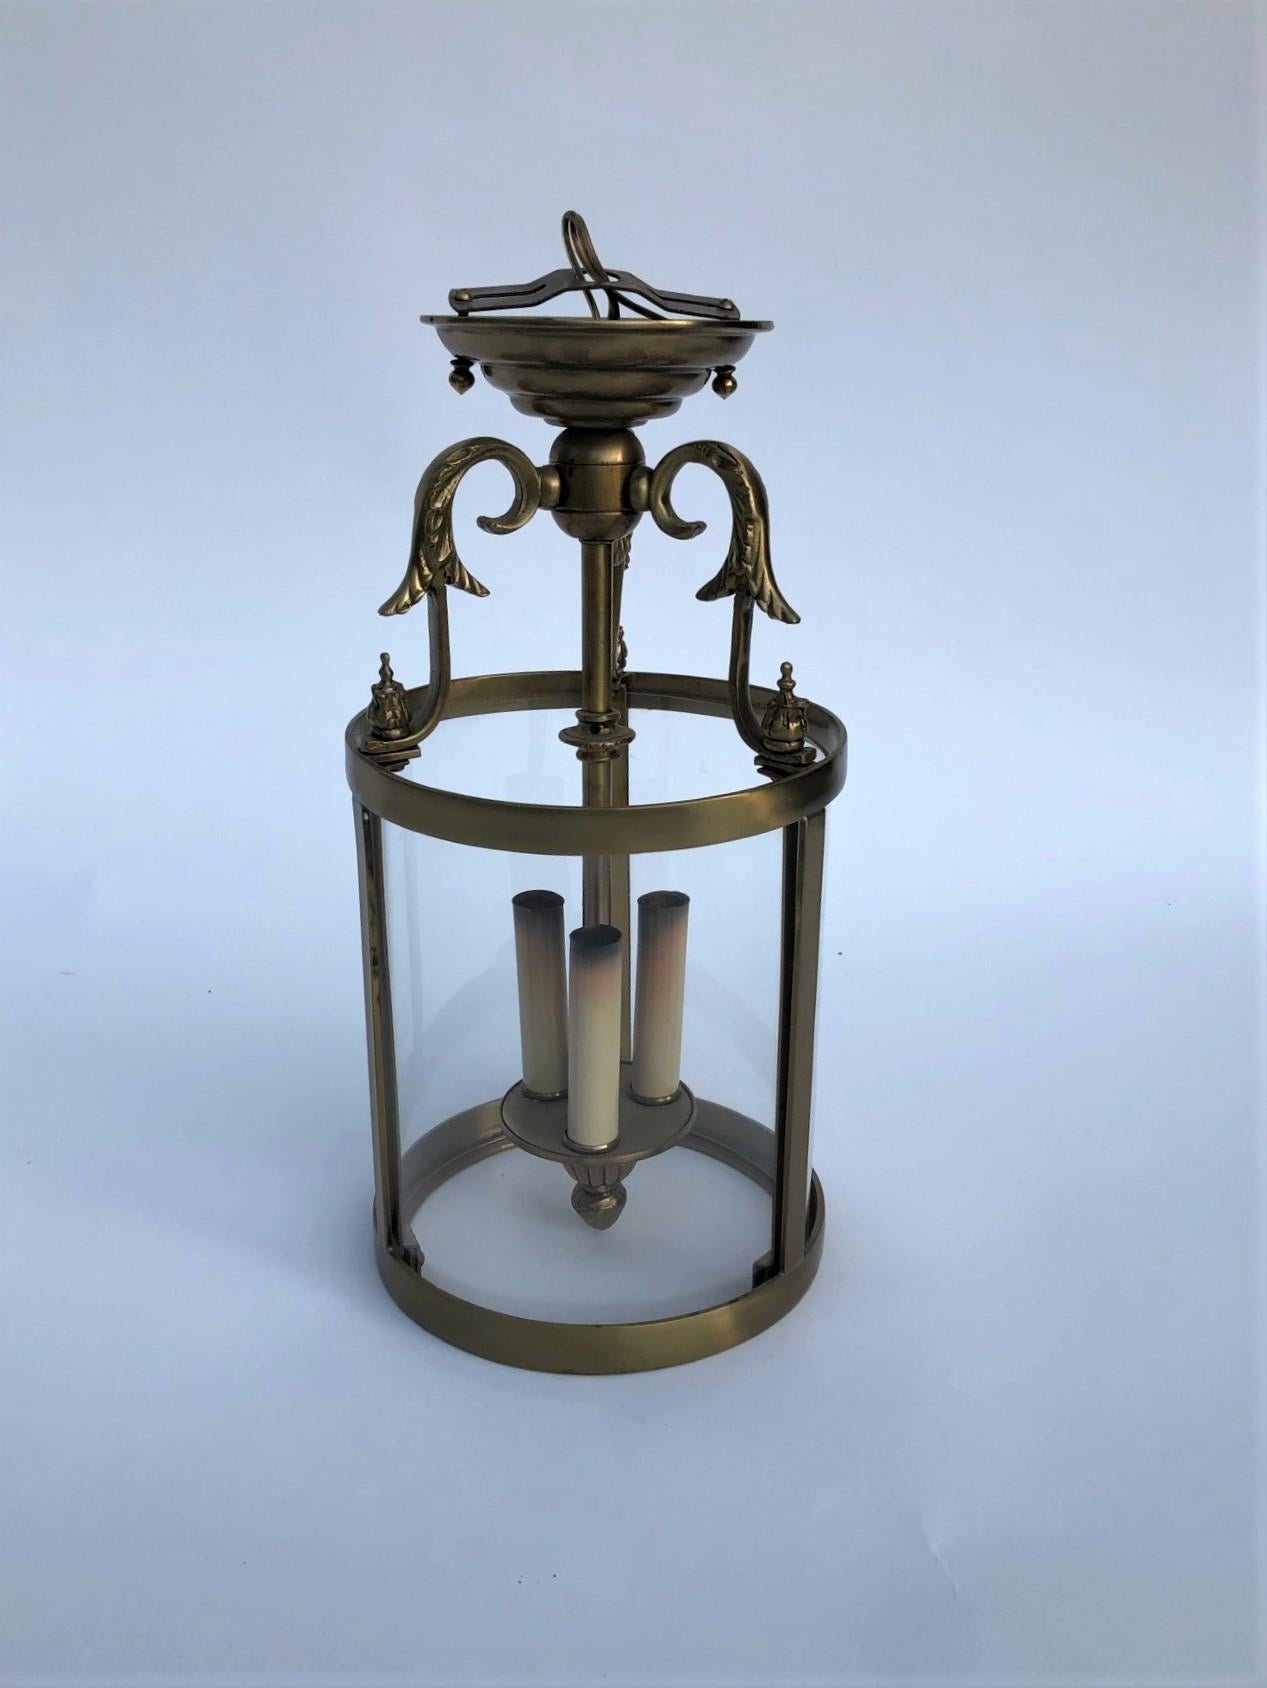 Elegant Brass Neoclassical Regency Lantern with 3 Candelabra Light Cluster and 3 Curved Glass Panels.

Five (5) Available - One (1) with Chip in Corner of One Glass Panel. Quoted Price Per Lantern.